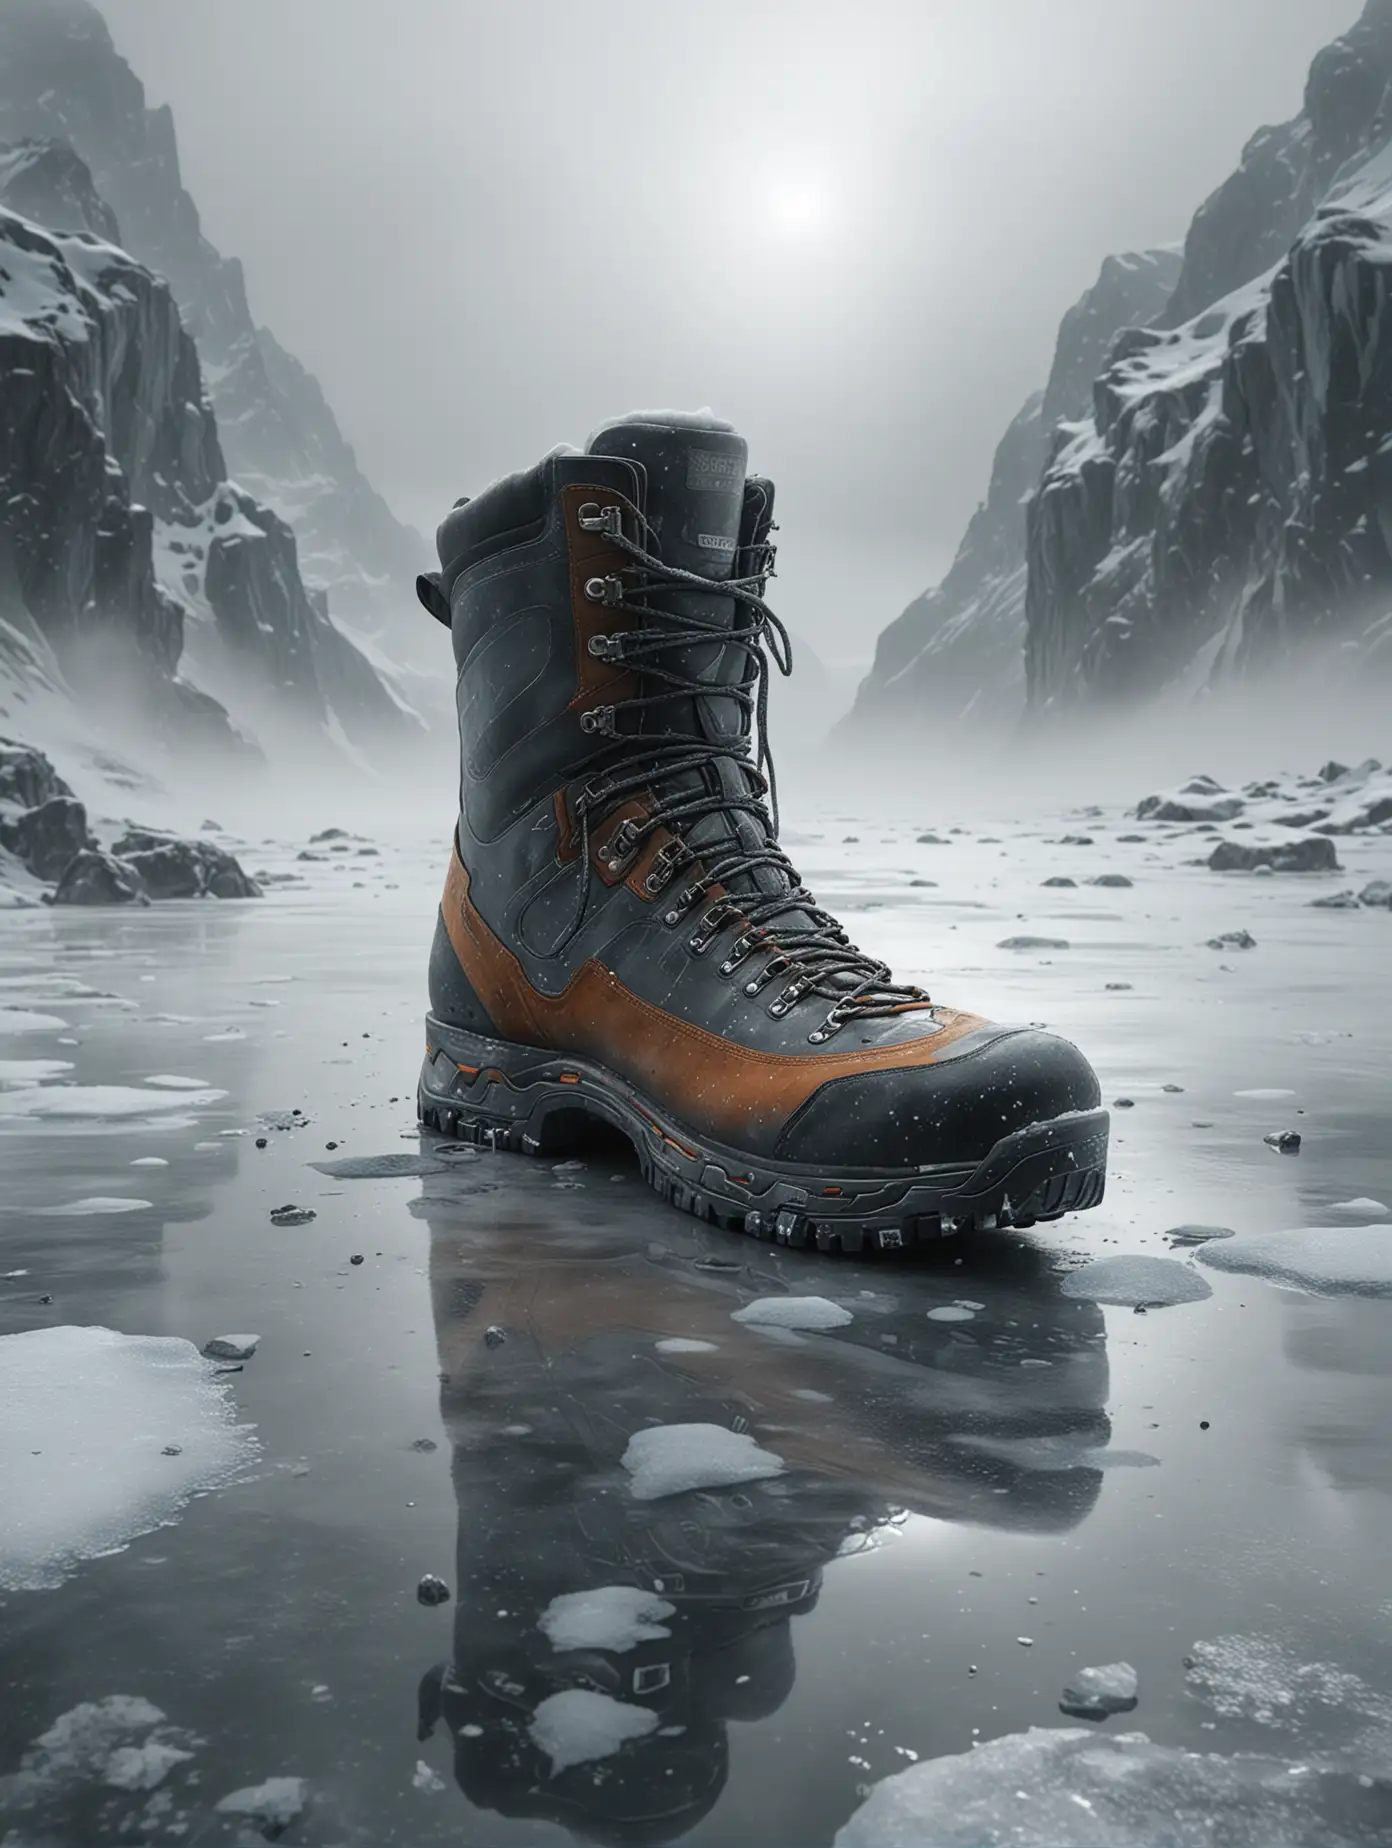 Ultra Realistic High Futurestic Boot on Foggy Ice Landscape